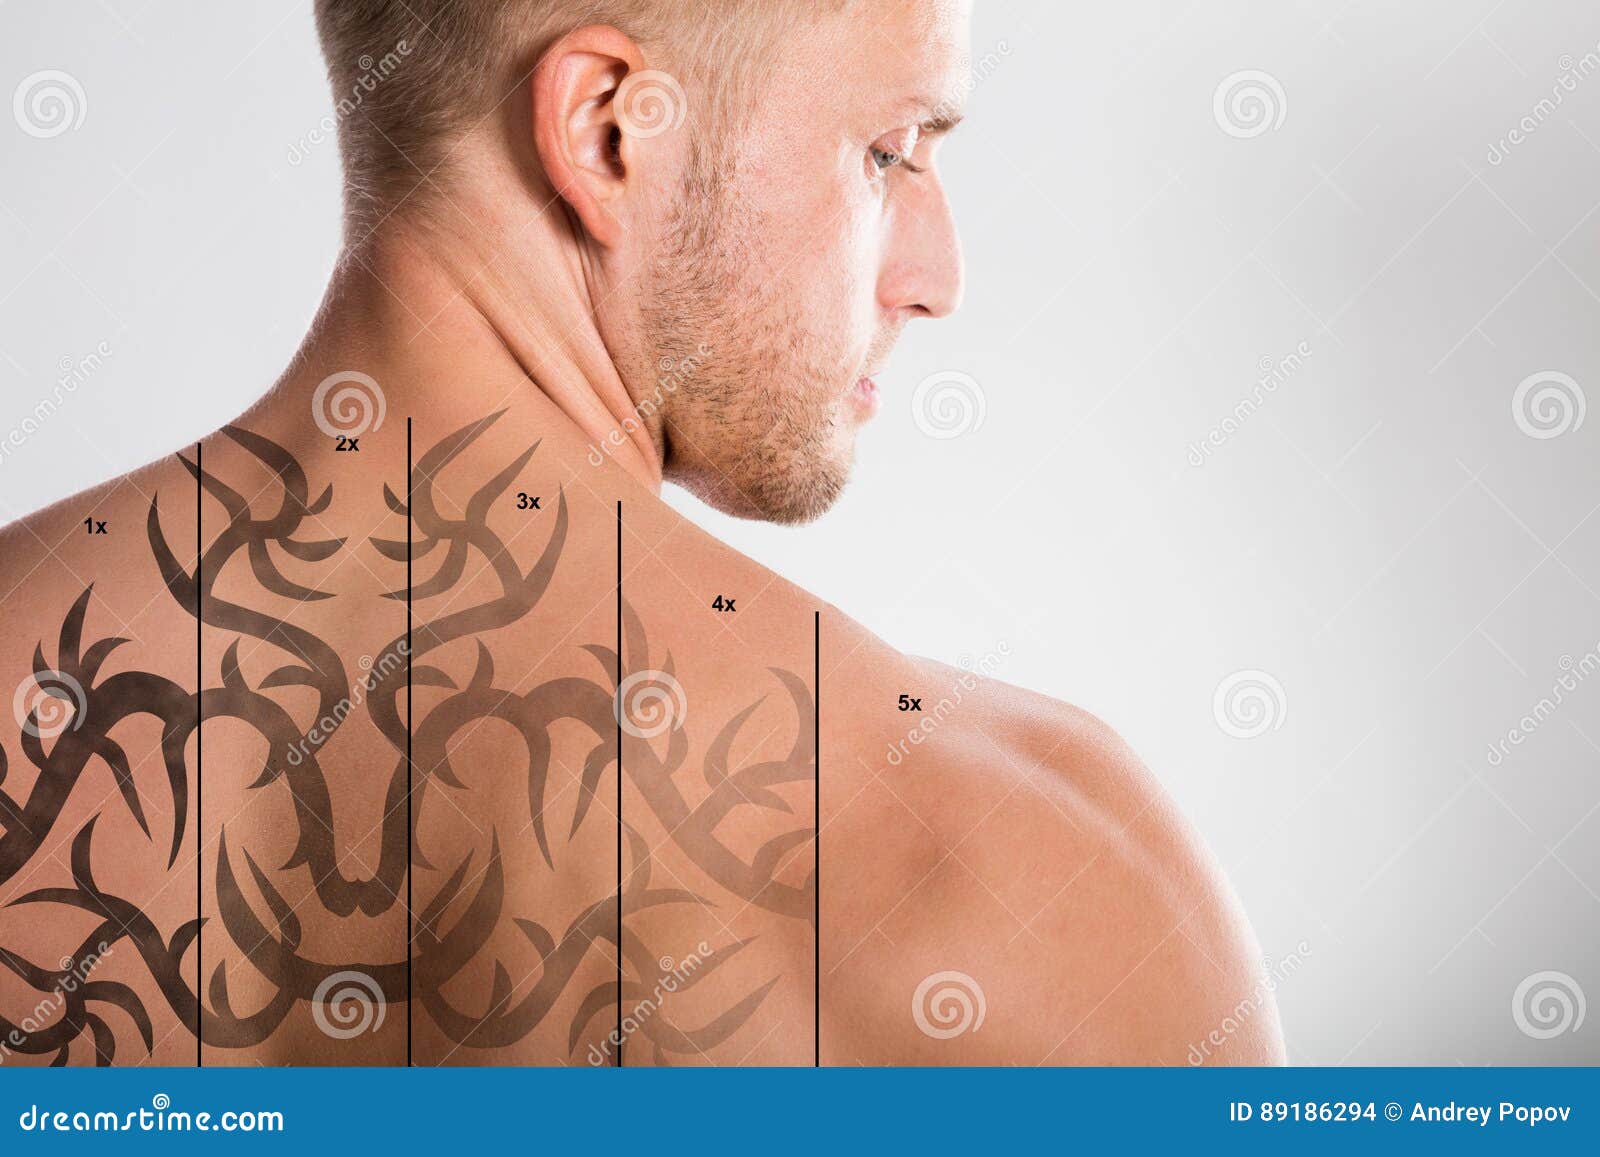 laser tattoo removal on man`s back